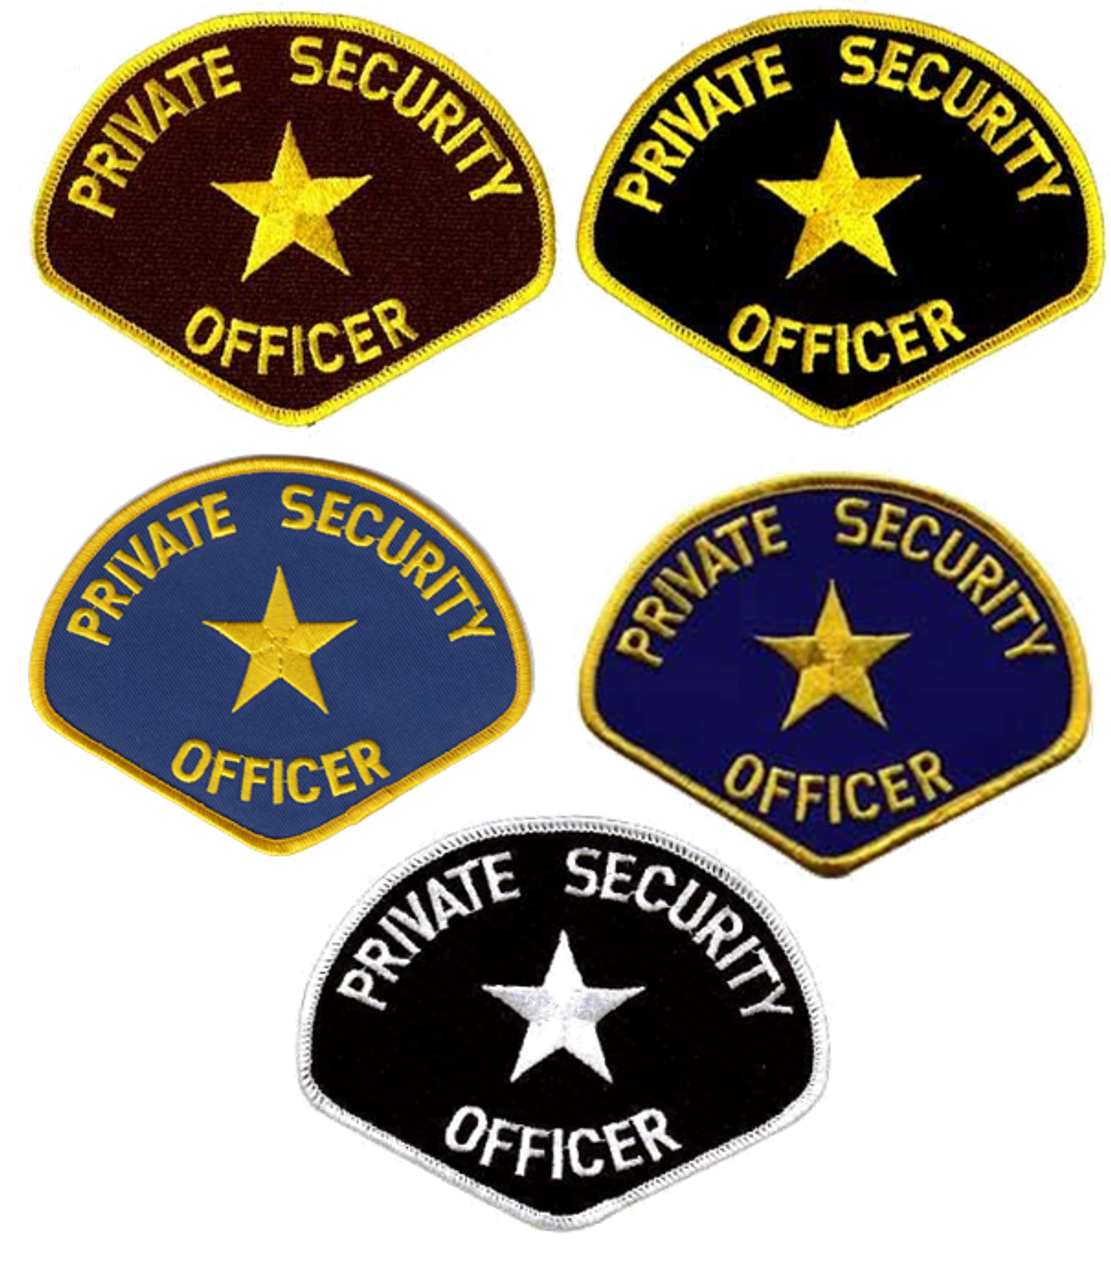 PRIVATE SECURITY OFFICER Shoulder Patch, 4-3/4x3-3/4 - Hero's Pride